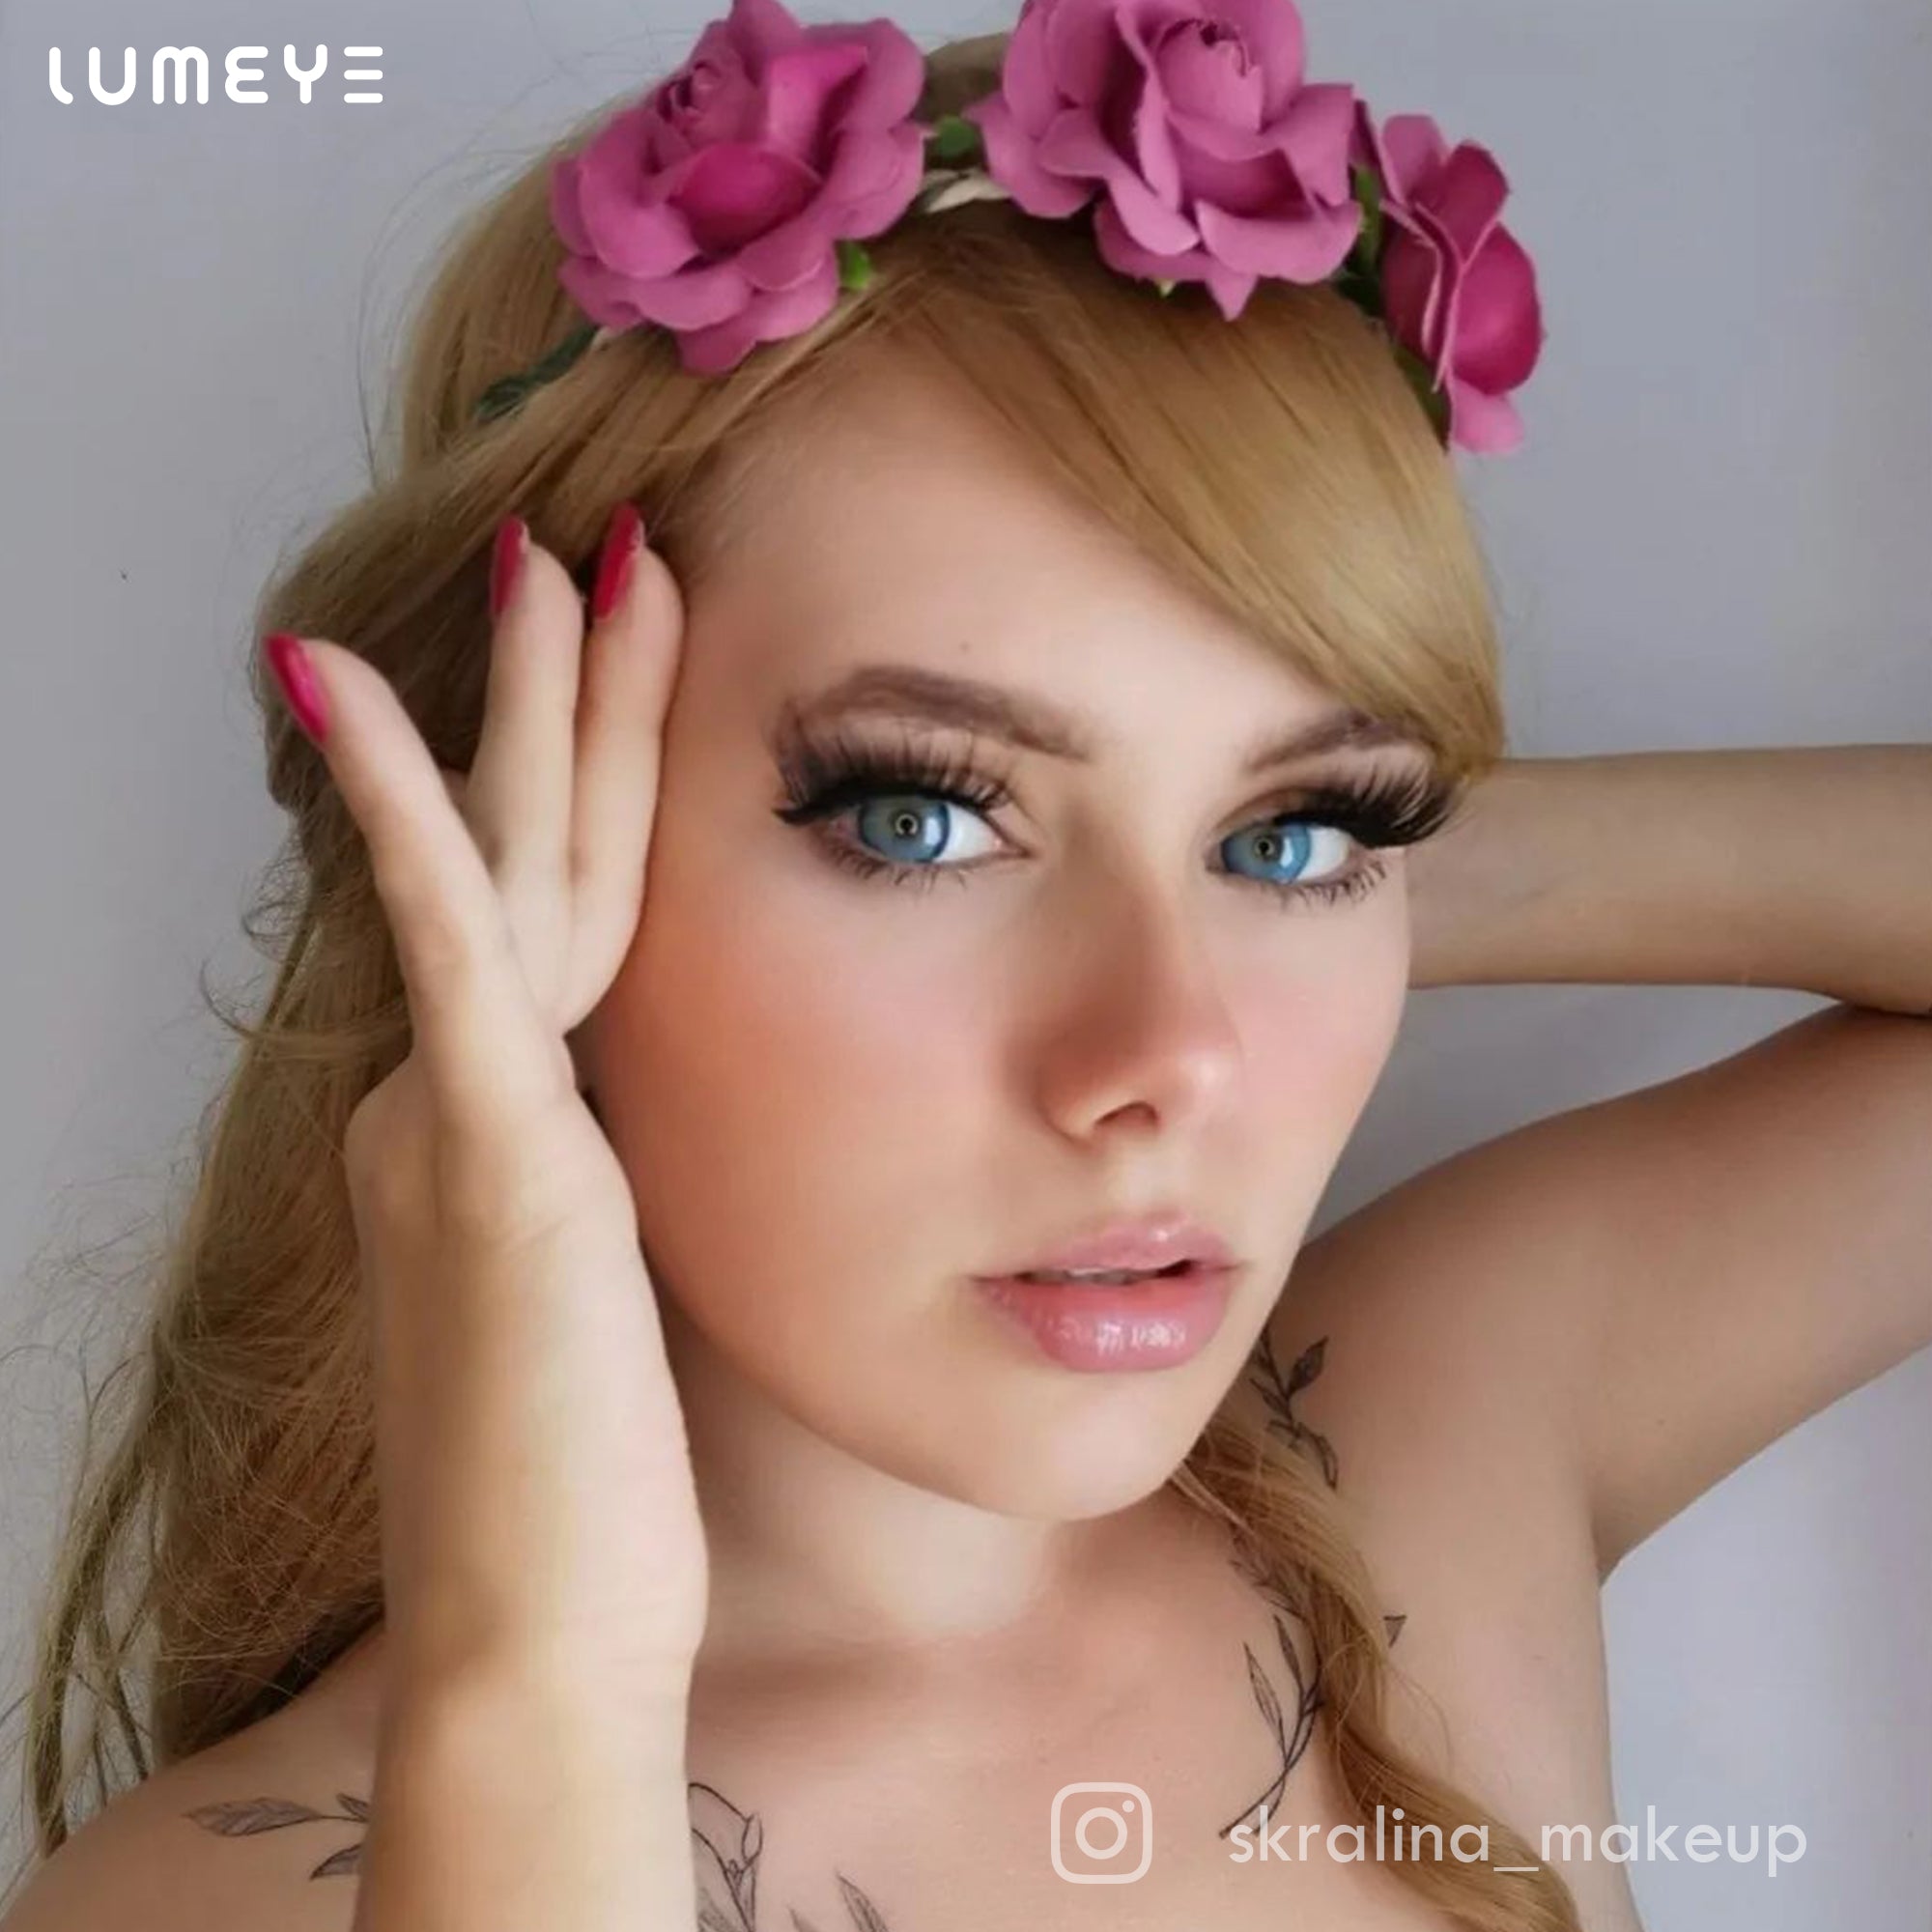 Best COLORED CONTACTS - LUMEYE Silver Beach Blue Colored Contact Lenses - LUMEYE